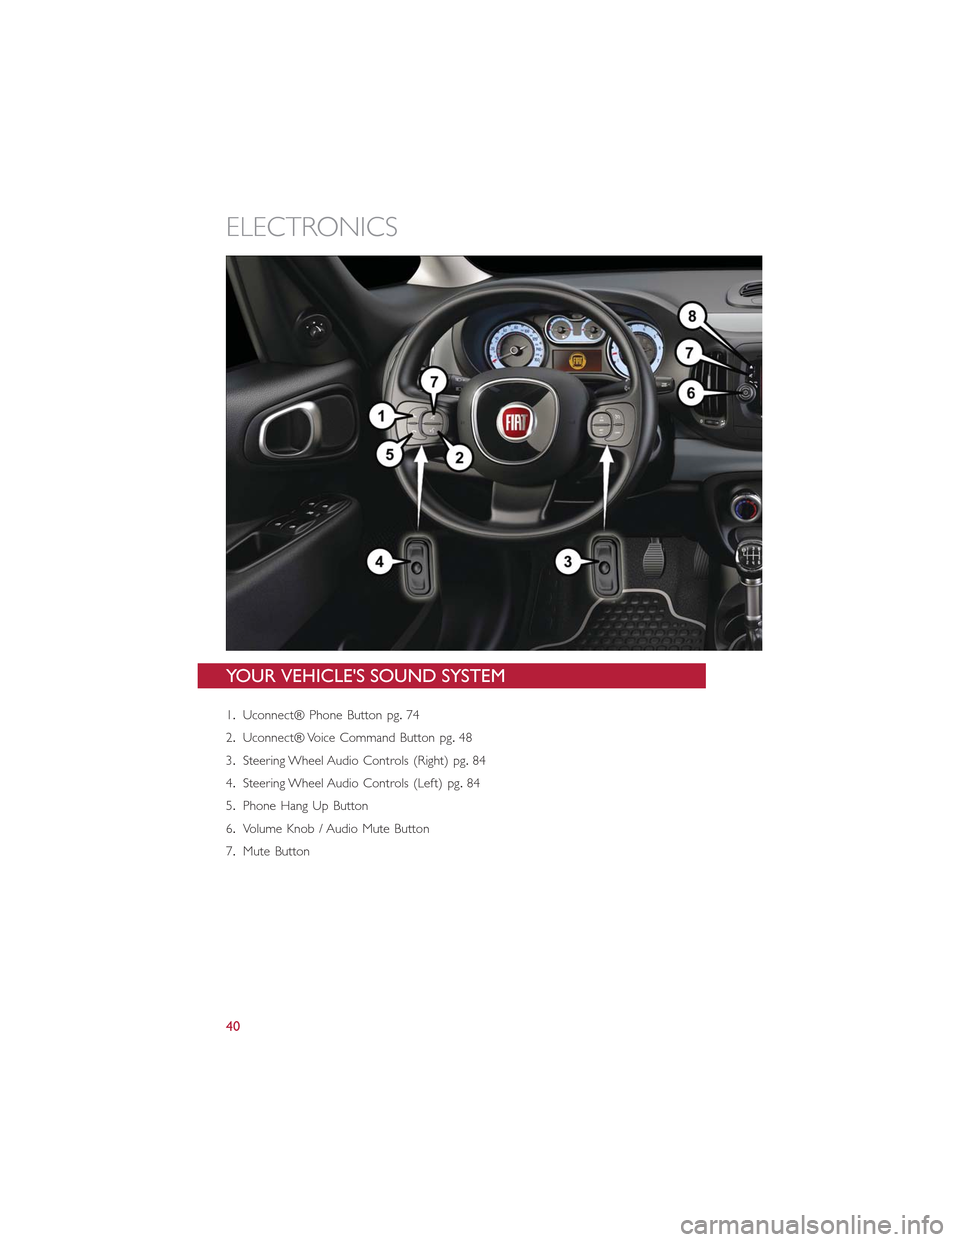 FIAT 500L 2015 2.G User Guide YOUR VEHICLES SOUND SYSTEM
1.Uconnect® Phone Button pg.74
2.Uconnect® Voice Command Button pg.48
3.Steering Wheel Audio Controls (Right) pg.84
4.Steering Wheel Audio Controls (Left) pg.84
5.Phone H